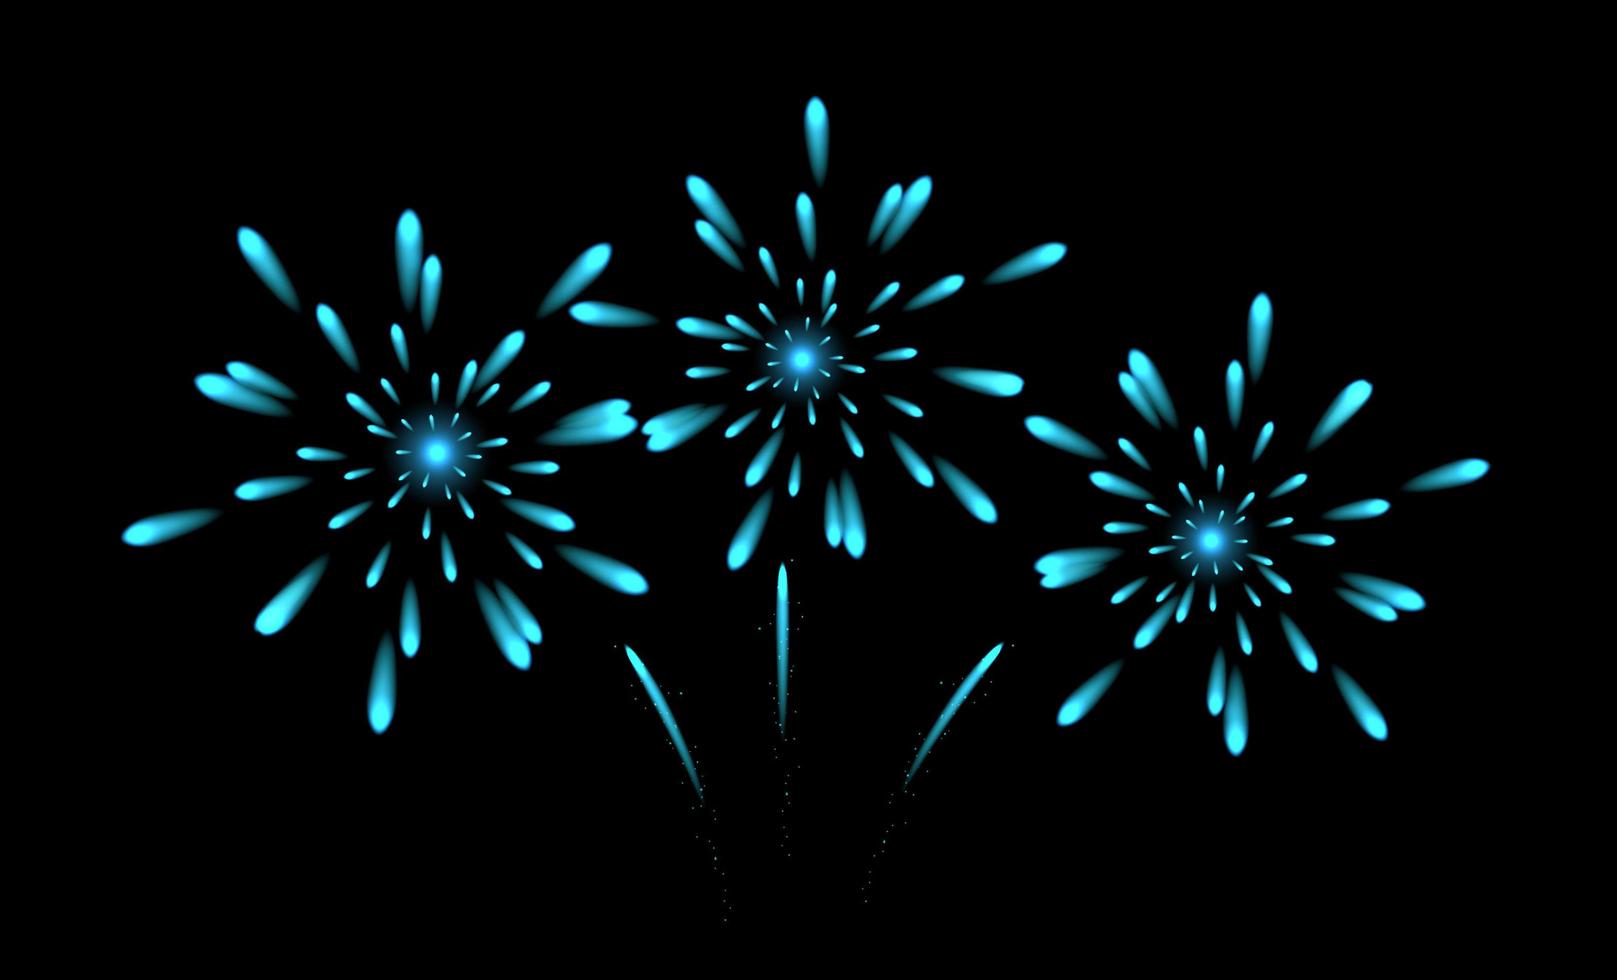 Blue fireworks. Isolated on black background. Realistic style. Vector illustration.